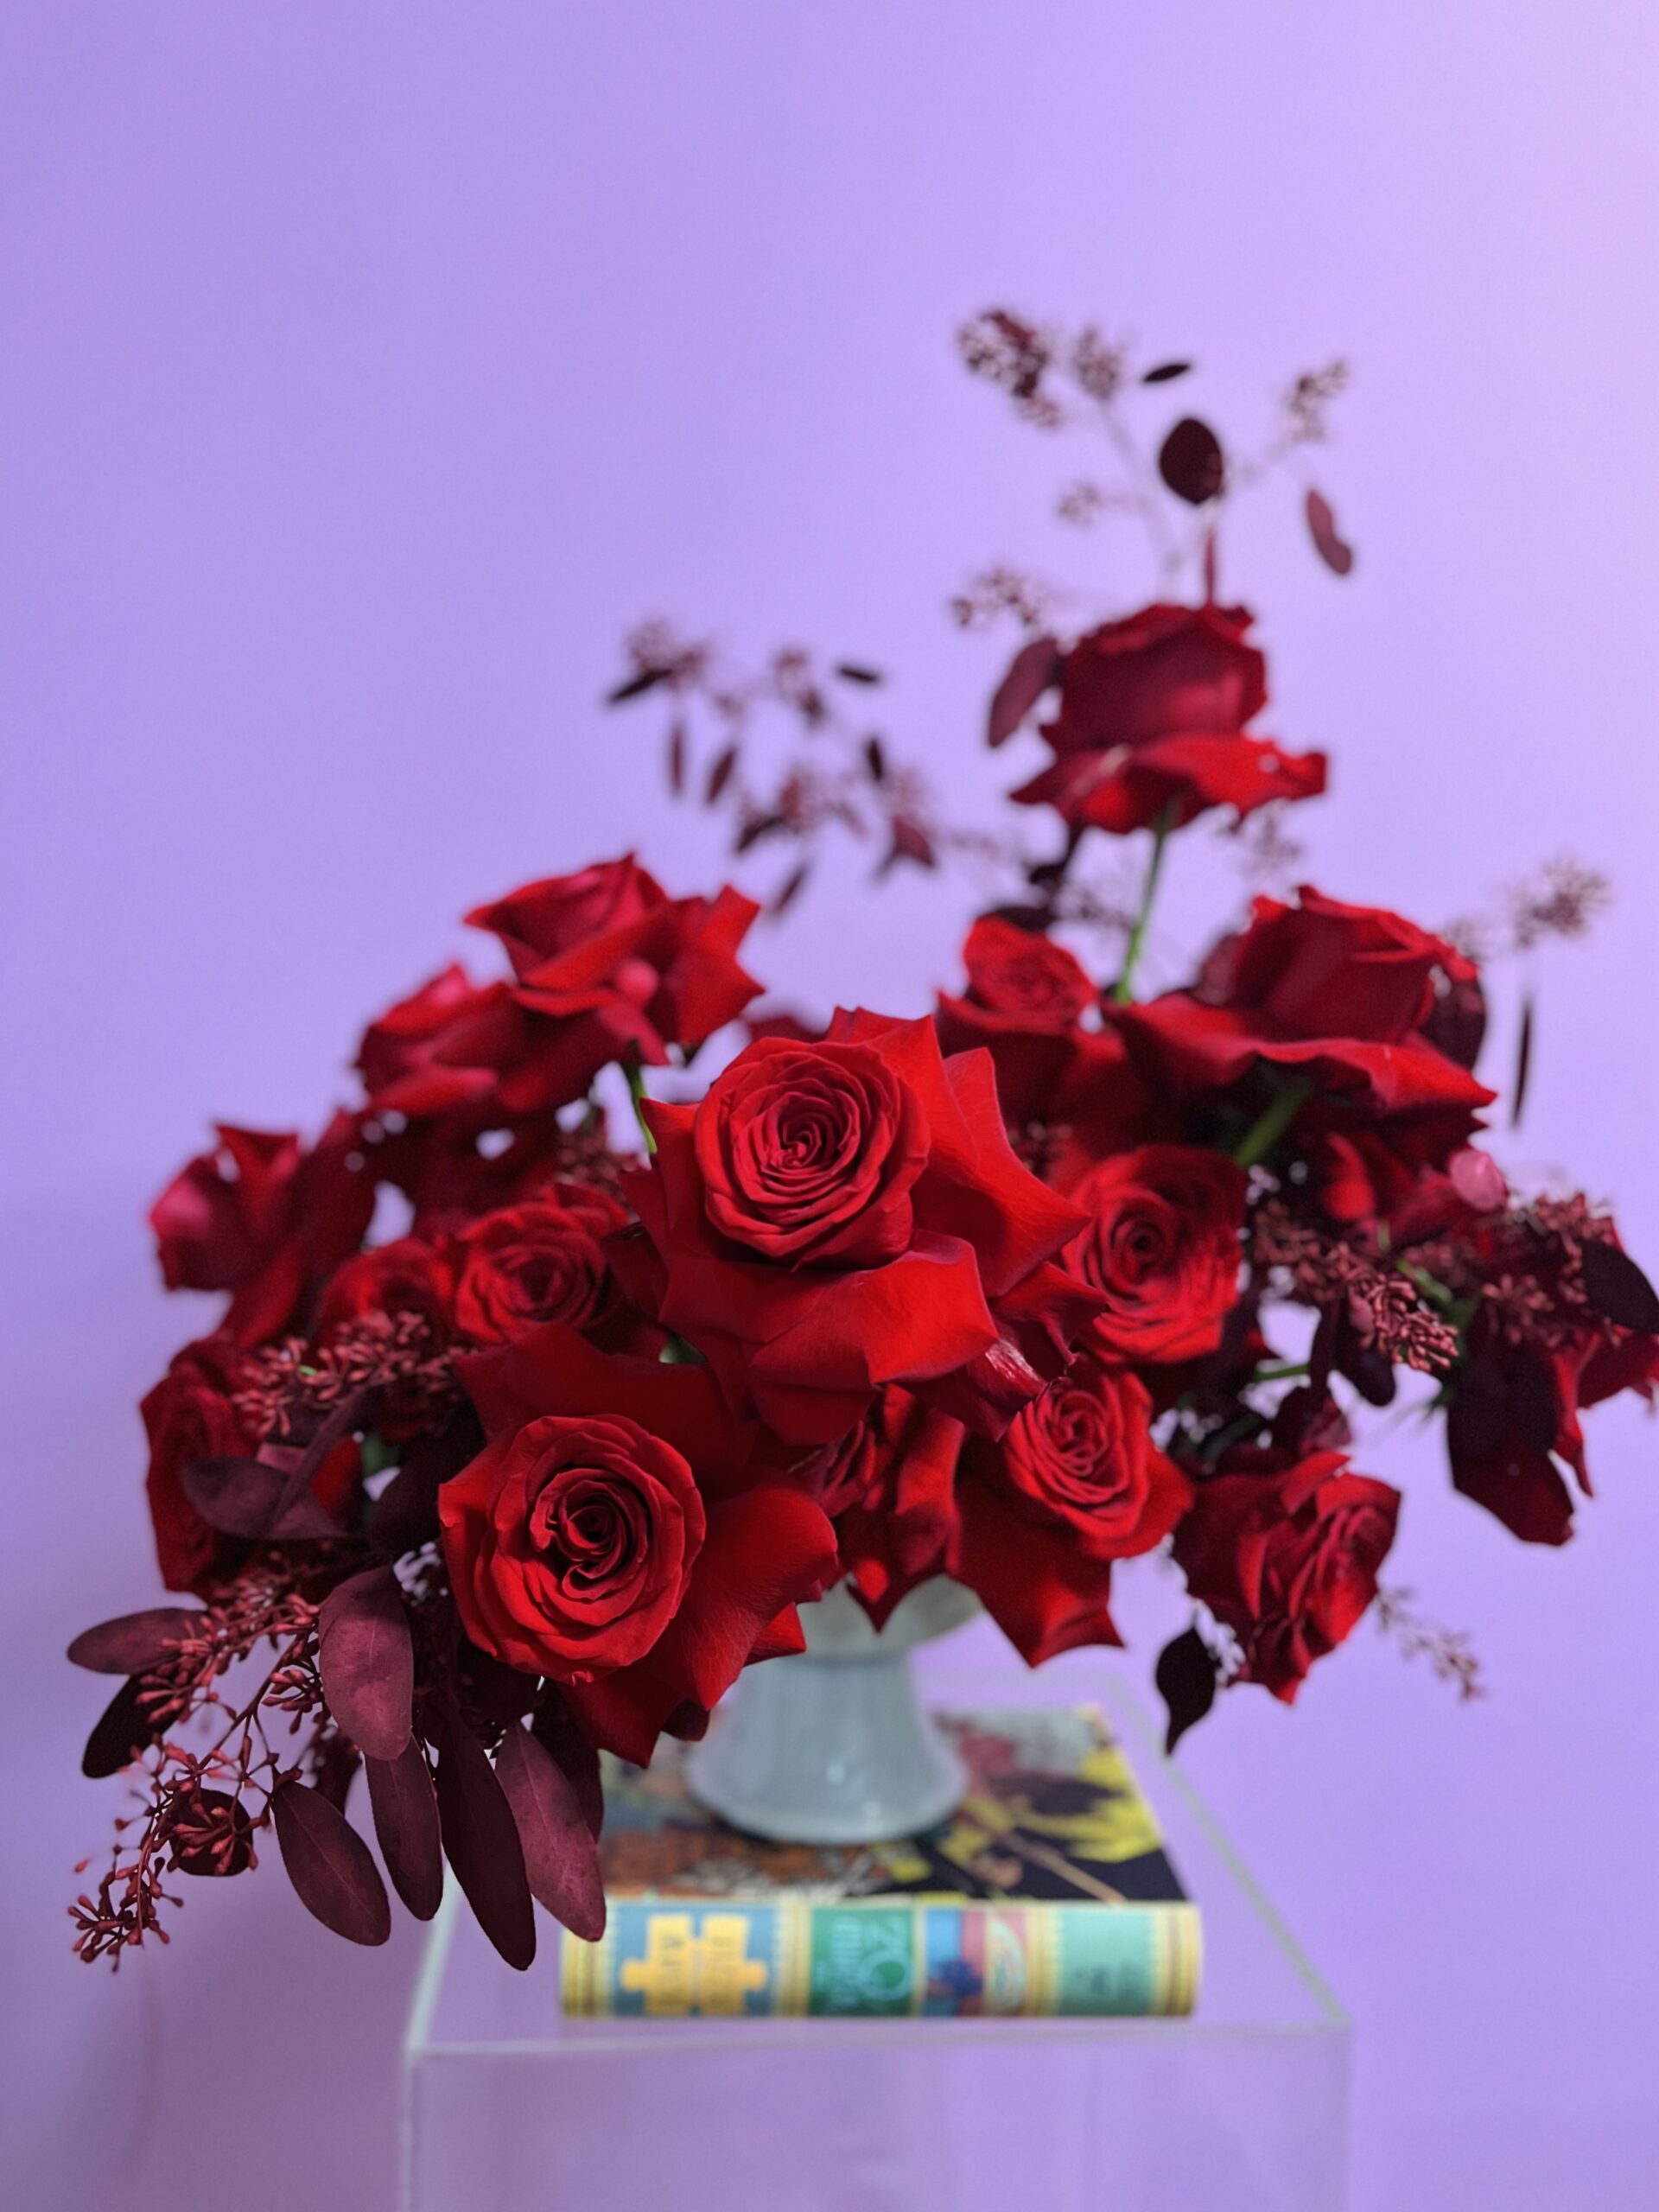 Flower arrangement with red roses